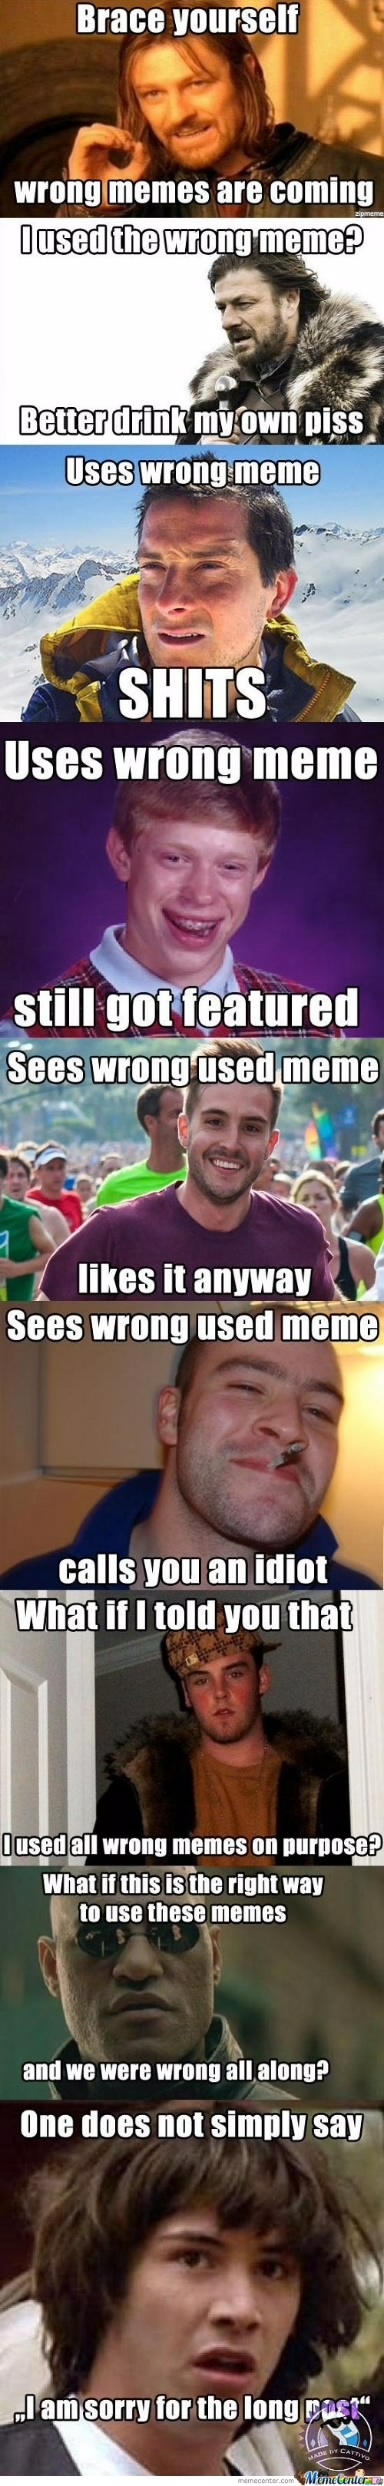 fb being using meme wrong all the time!